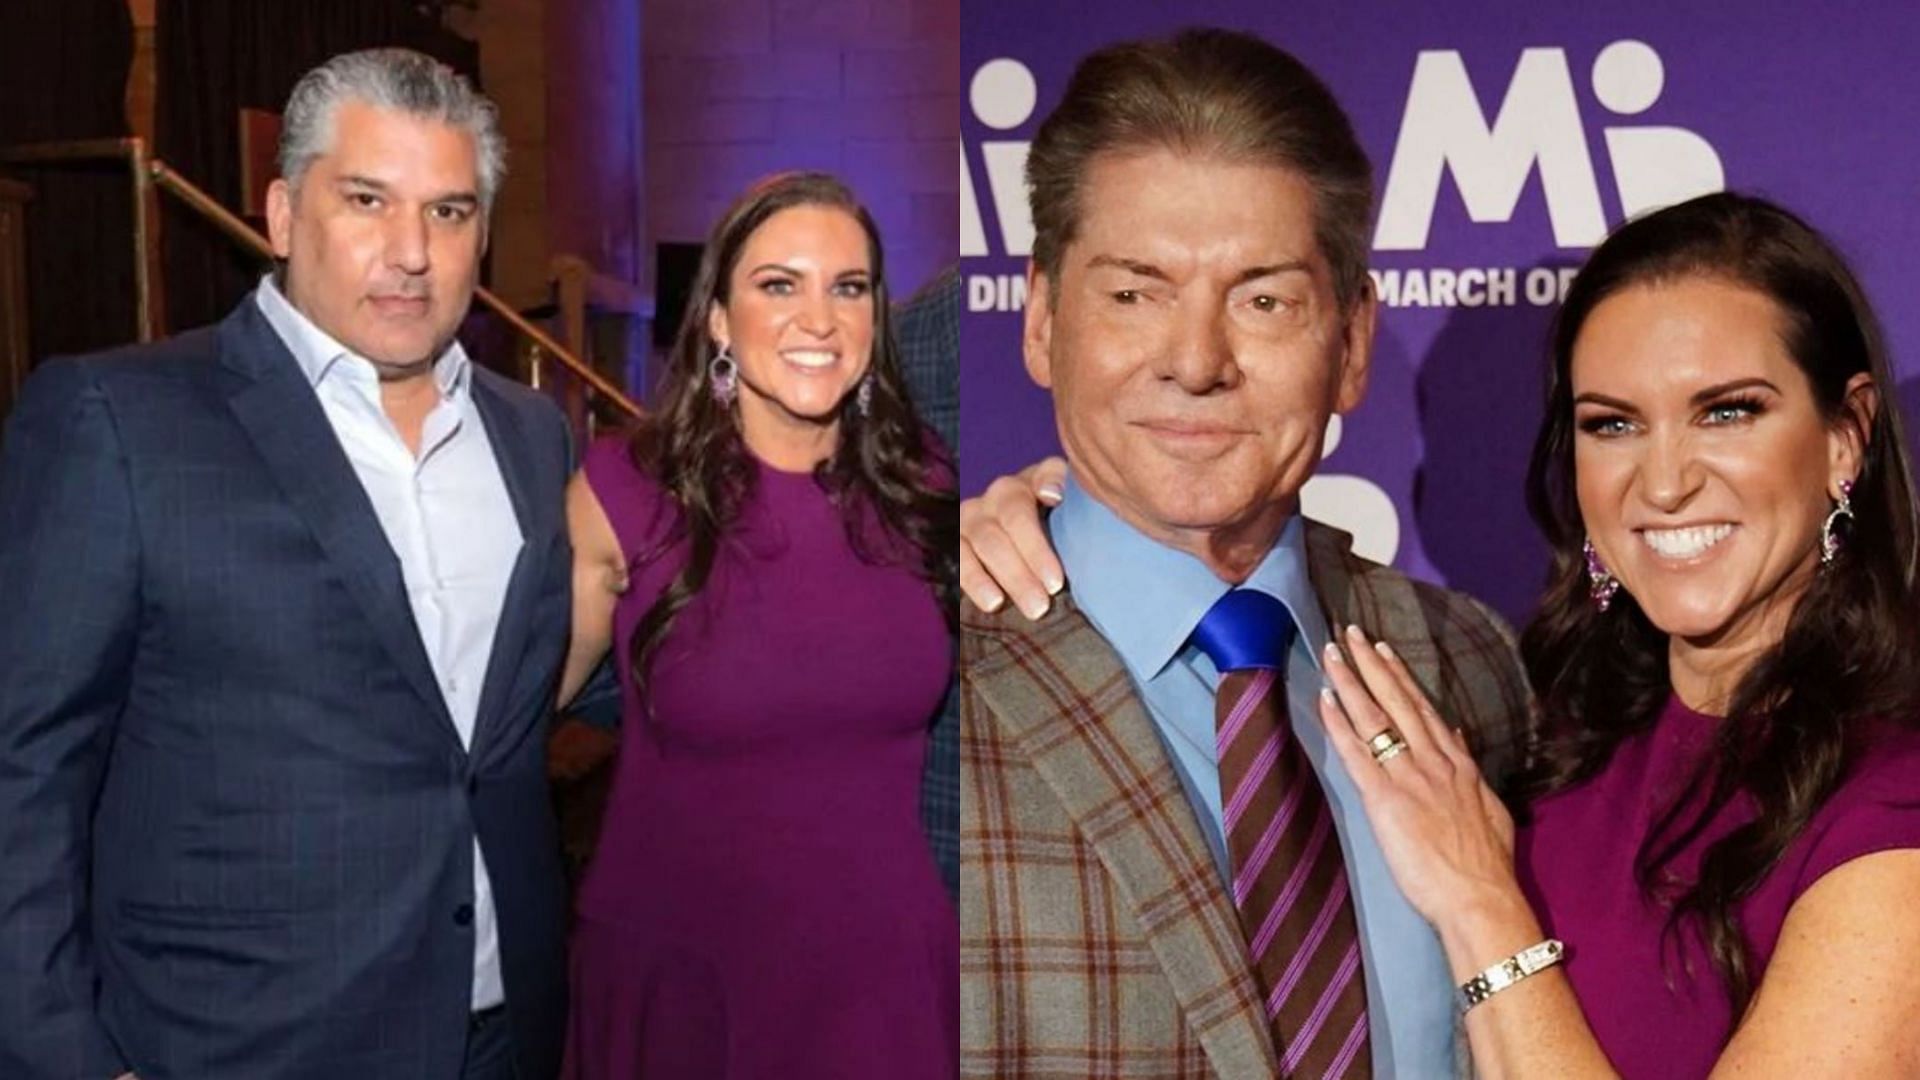 Stephanie McMahon and Nick Khan replace Vince McMahon as co-CEOs